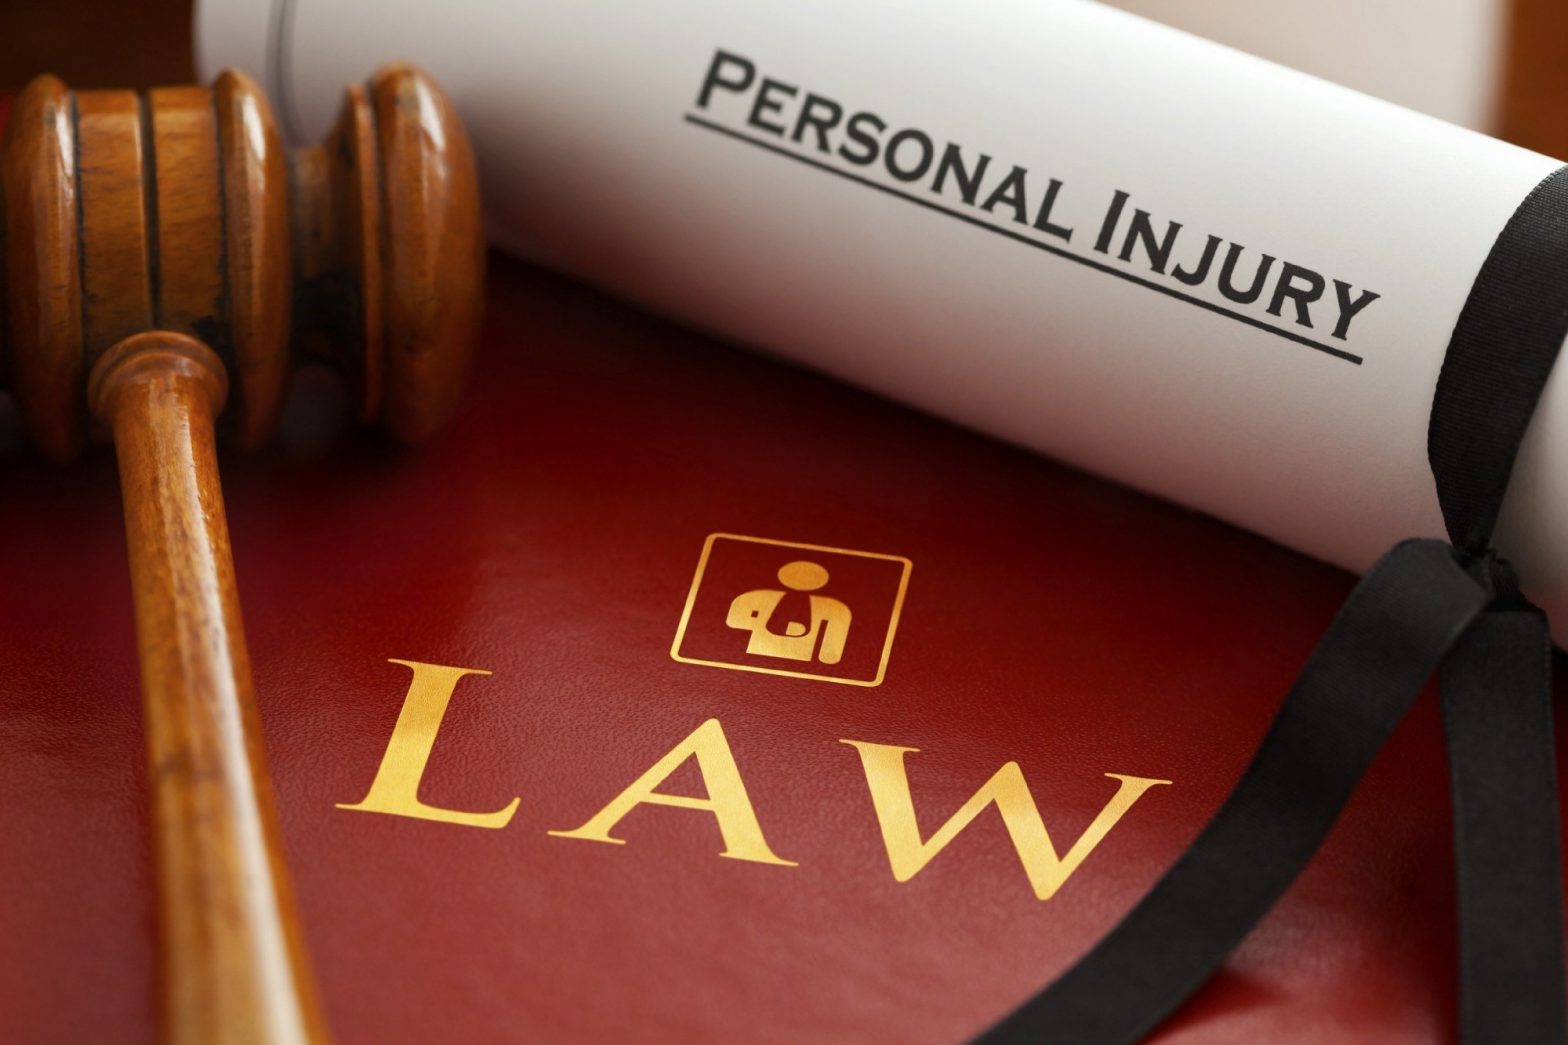 workers compensation claim